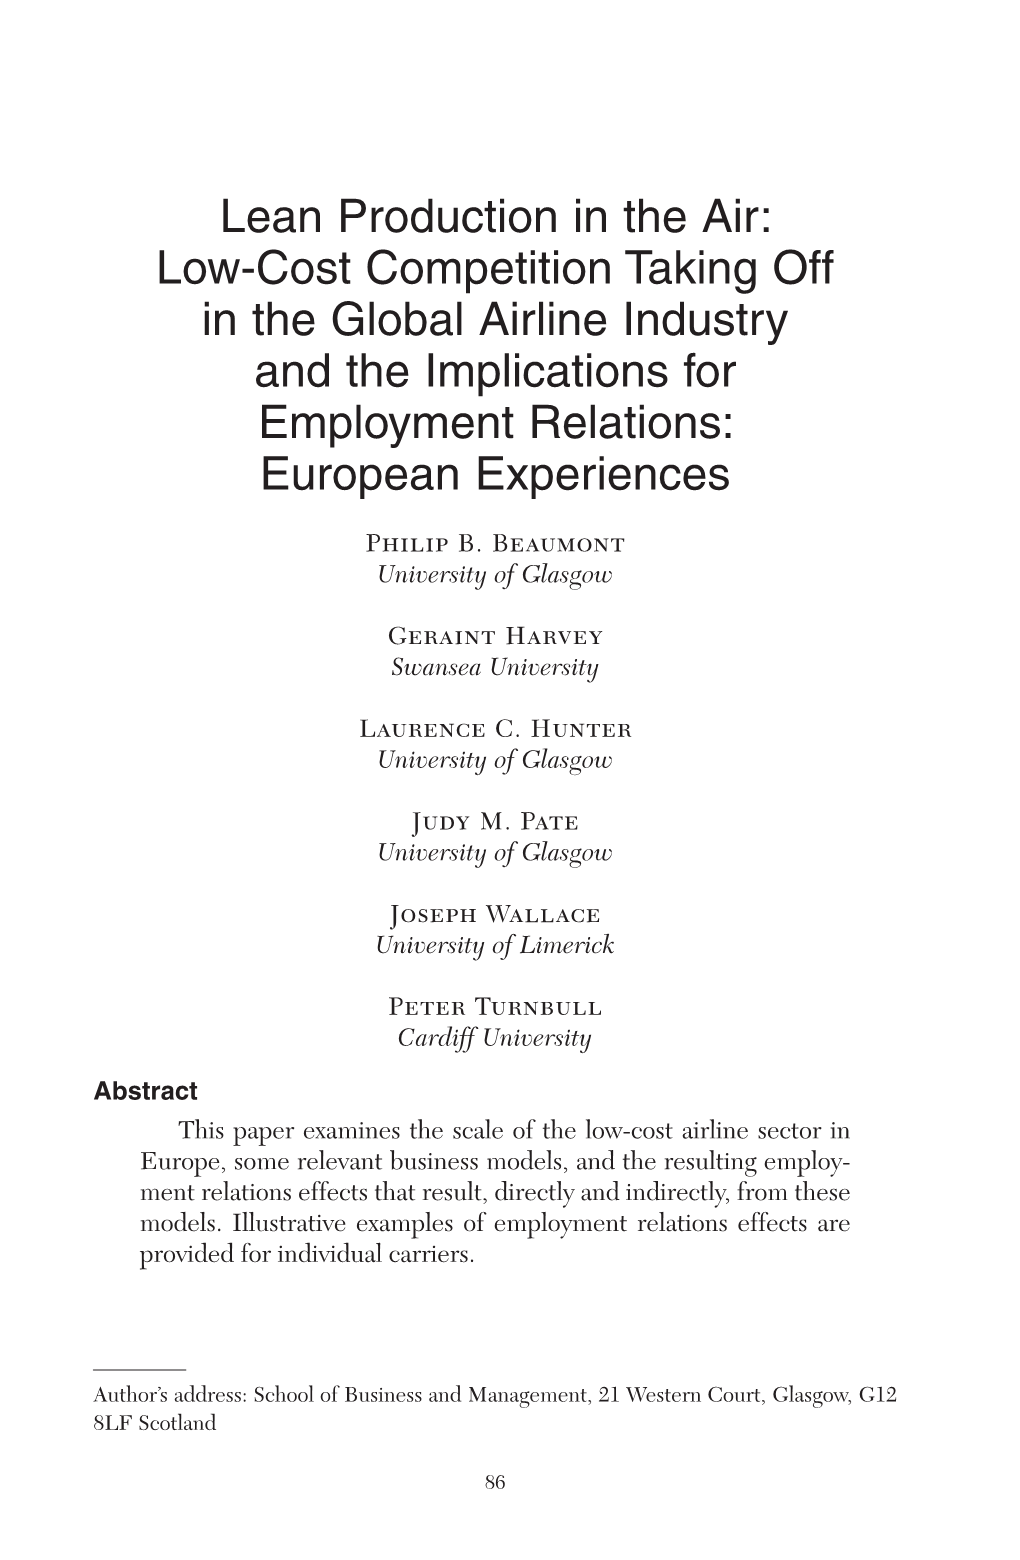 Lean Production in the Air: Low-Cost Competition Taking Off in the Global Airline Industry and the Implications for Employment Relations: European Experiences